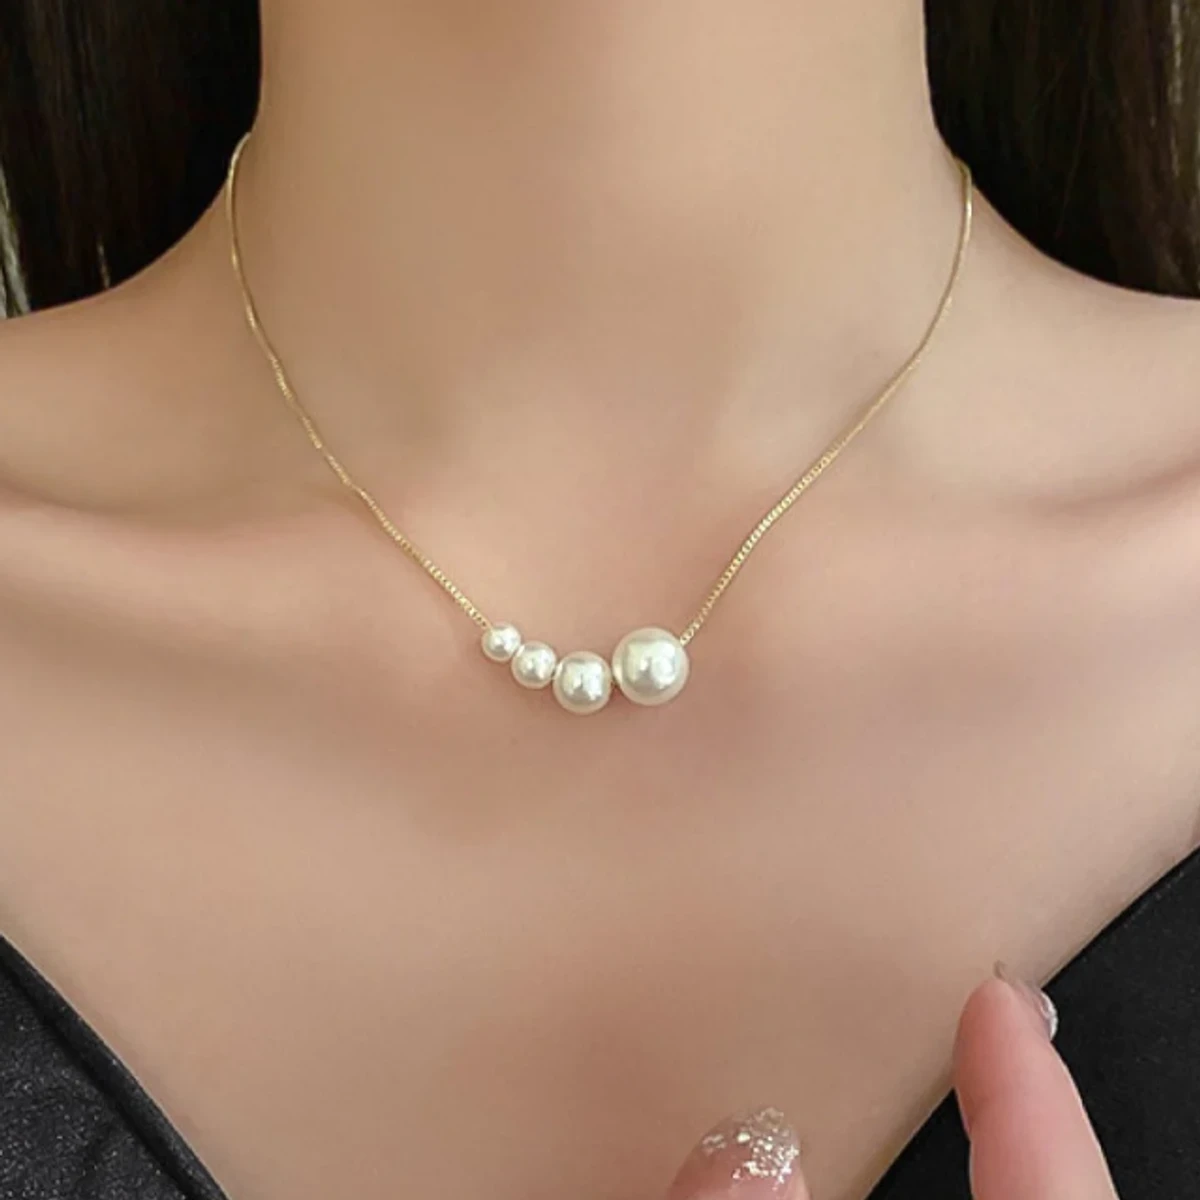 Korean Girls Ins Pearl Necklace Pendant Clavicle Chain